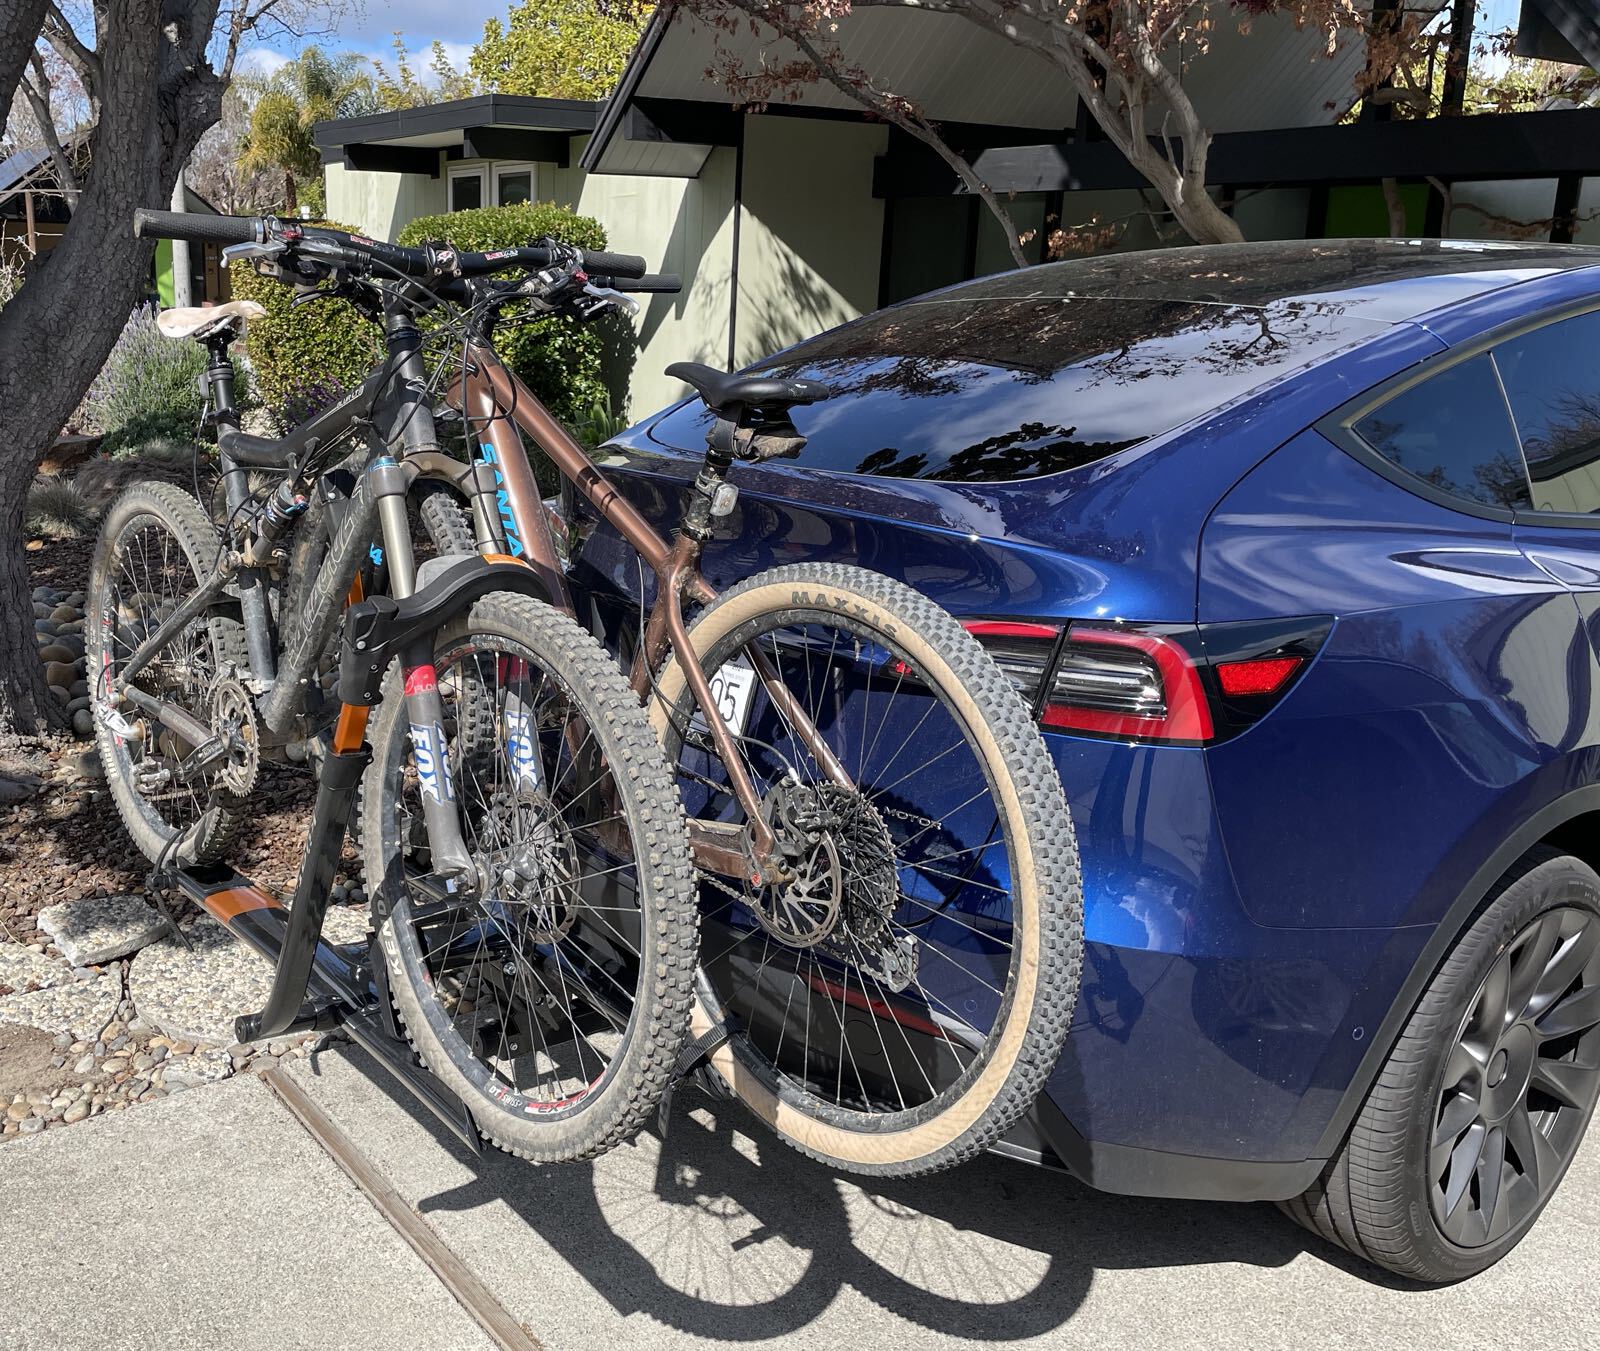 Tesla Model Y Energy Consumption With and Without Bikes on Rack | Electronics etc… Best Bike Rack For Tesla Model Y